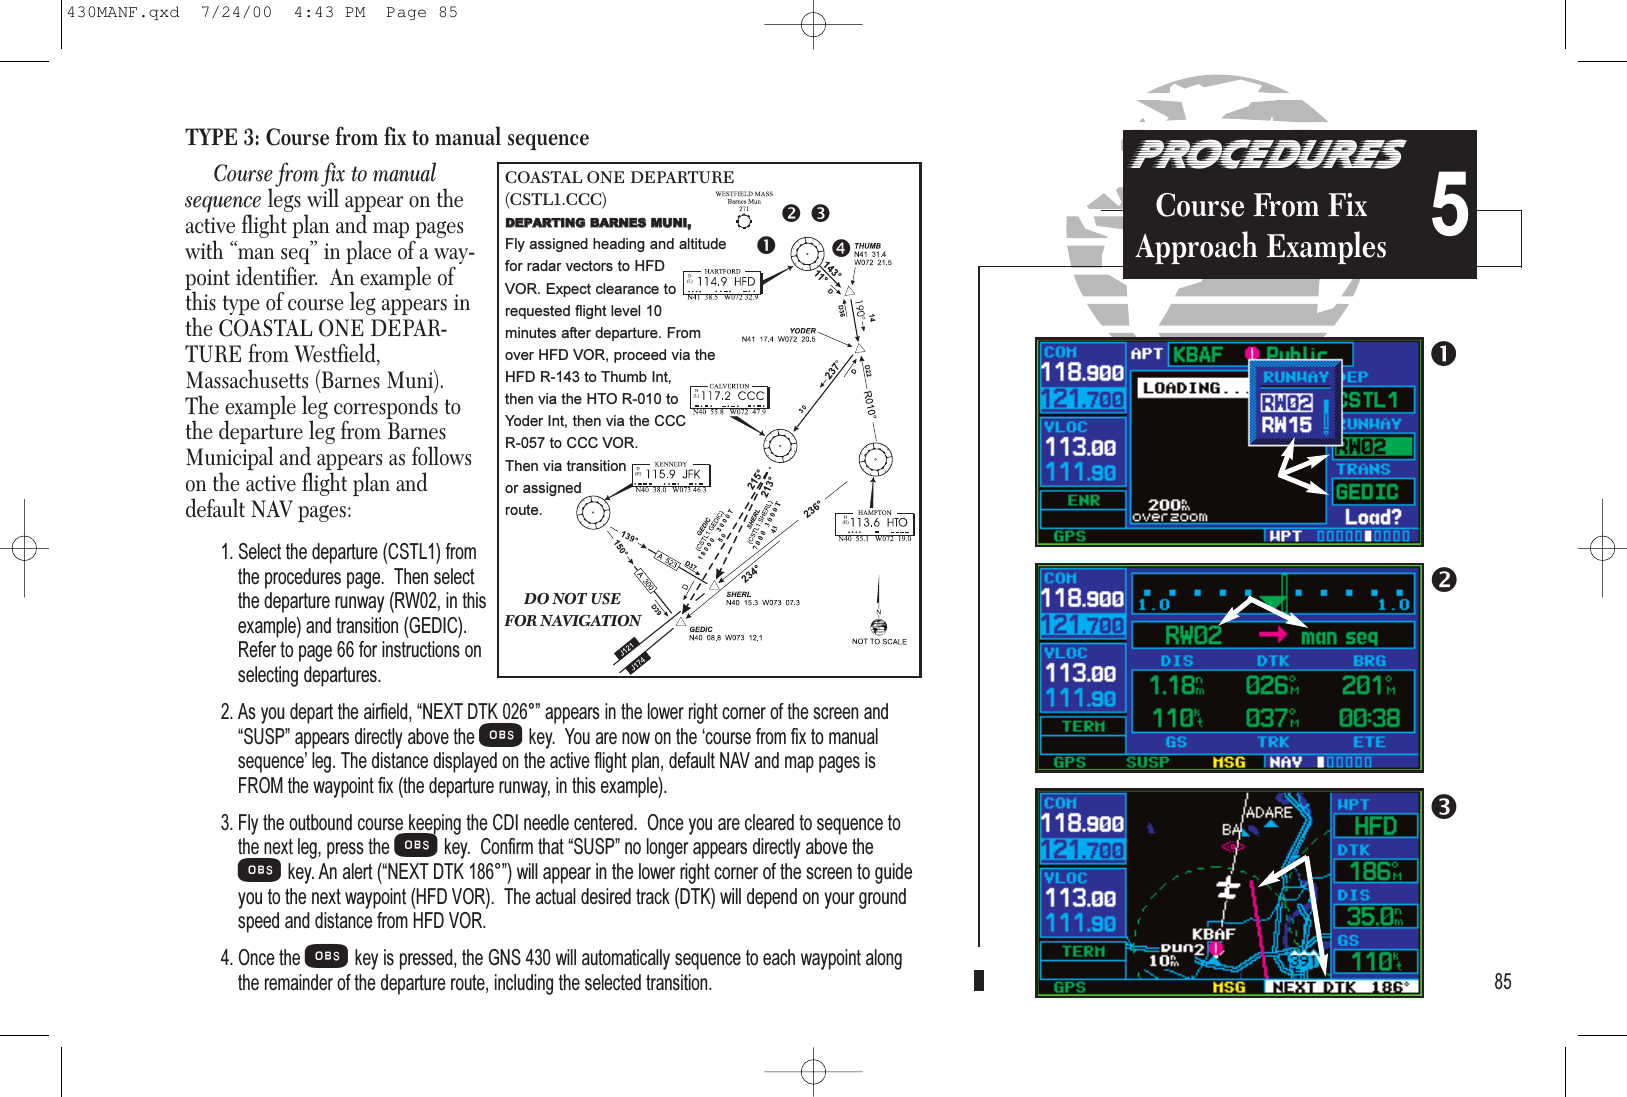 TYPE 3: Course from fix to manual sequenceCourse from fix to manualsequence legs will appear on theactive flight plan and map pageswith “man seq” in place of a way-point identifier.  An example ofthis type of course leg appears inthe COASTAL ONE DEPAR-TURE from Westfield,Massachusetts (Barnes Muni).The example leg corresponds tothe departure leg from BarnesMunicipal and appears as followson the active flight plan anddefault NAV pages:1. Select the departure (CSTL1) fromthe procedures page.  Then selectthe departure runway (RW02, in thisexample) and transition (GEDIC).Refer to page 66 for instructions onselecting departures.2. As you depart the airfield, NEXT DTK 026° appears in the lower right corner of the screen andSUSP appears directly above theOkey.  You are now on the course from fix to manualsequence leg. The distance displayed on the active flight plan, default NAV and map pages isFROM the waypoint fix (the departure runway, in this example).3. Fly the outbound course keeping the CDI needle centered.  Once you are cleared to sequence tothe next leg, press the Okey.  Confirm that SUSP no longer appears directly above theOkey. An alert (NEXT DTK 186°) will appear in the lower right corner of the screen to guideyou to the next waypoint (HFD VOR).  The actual desired track (DTK) will depend on your groundspeed and distance from HFD VOR.4. Once theOkey is pressed, the GNS 430 will automatically sequence to each waypoint alongthe remainder of the departure route, including the selected transition.855DO NOT USEFOR NAVIGATIONCOASTAL ONE DEPARTURE (CSTL1.CCC)DDEEPPAARRTTIINNGGBBAARRNNEESSMMUUNNII,,Fly assigned heading and altitude for radar vectors to HFD VOR. Expect clearance to requested flight level 10 minutes after departure. From over HFD VOR, proceed via theHFD R-143 to Thumb Int, then via the HTO R-010 to Yoder Int, then via the CCC R-057 to CCC VOR. Then via transition or assigned route.PROCEDURESCourse From FixApproach Examples430MANF.qxd  7/24/00  4:43 PM  Page 85